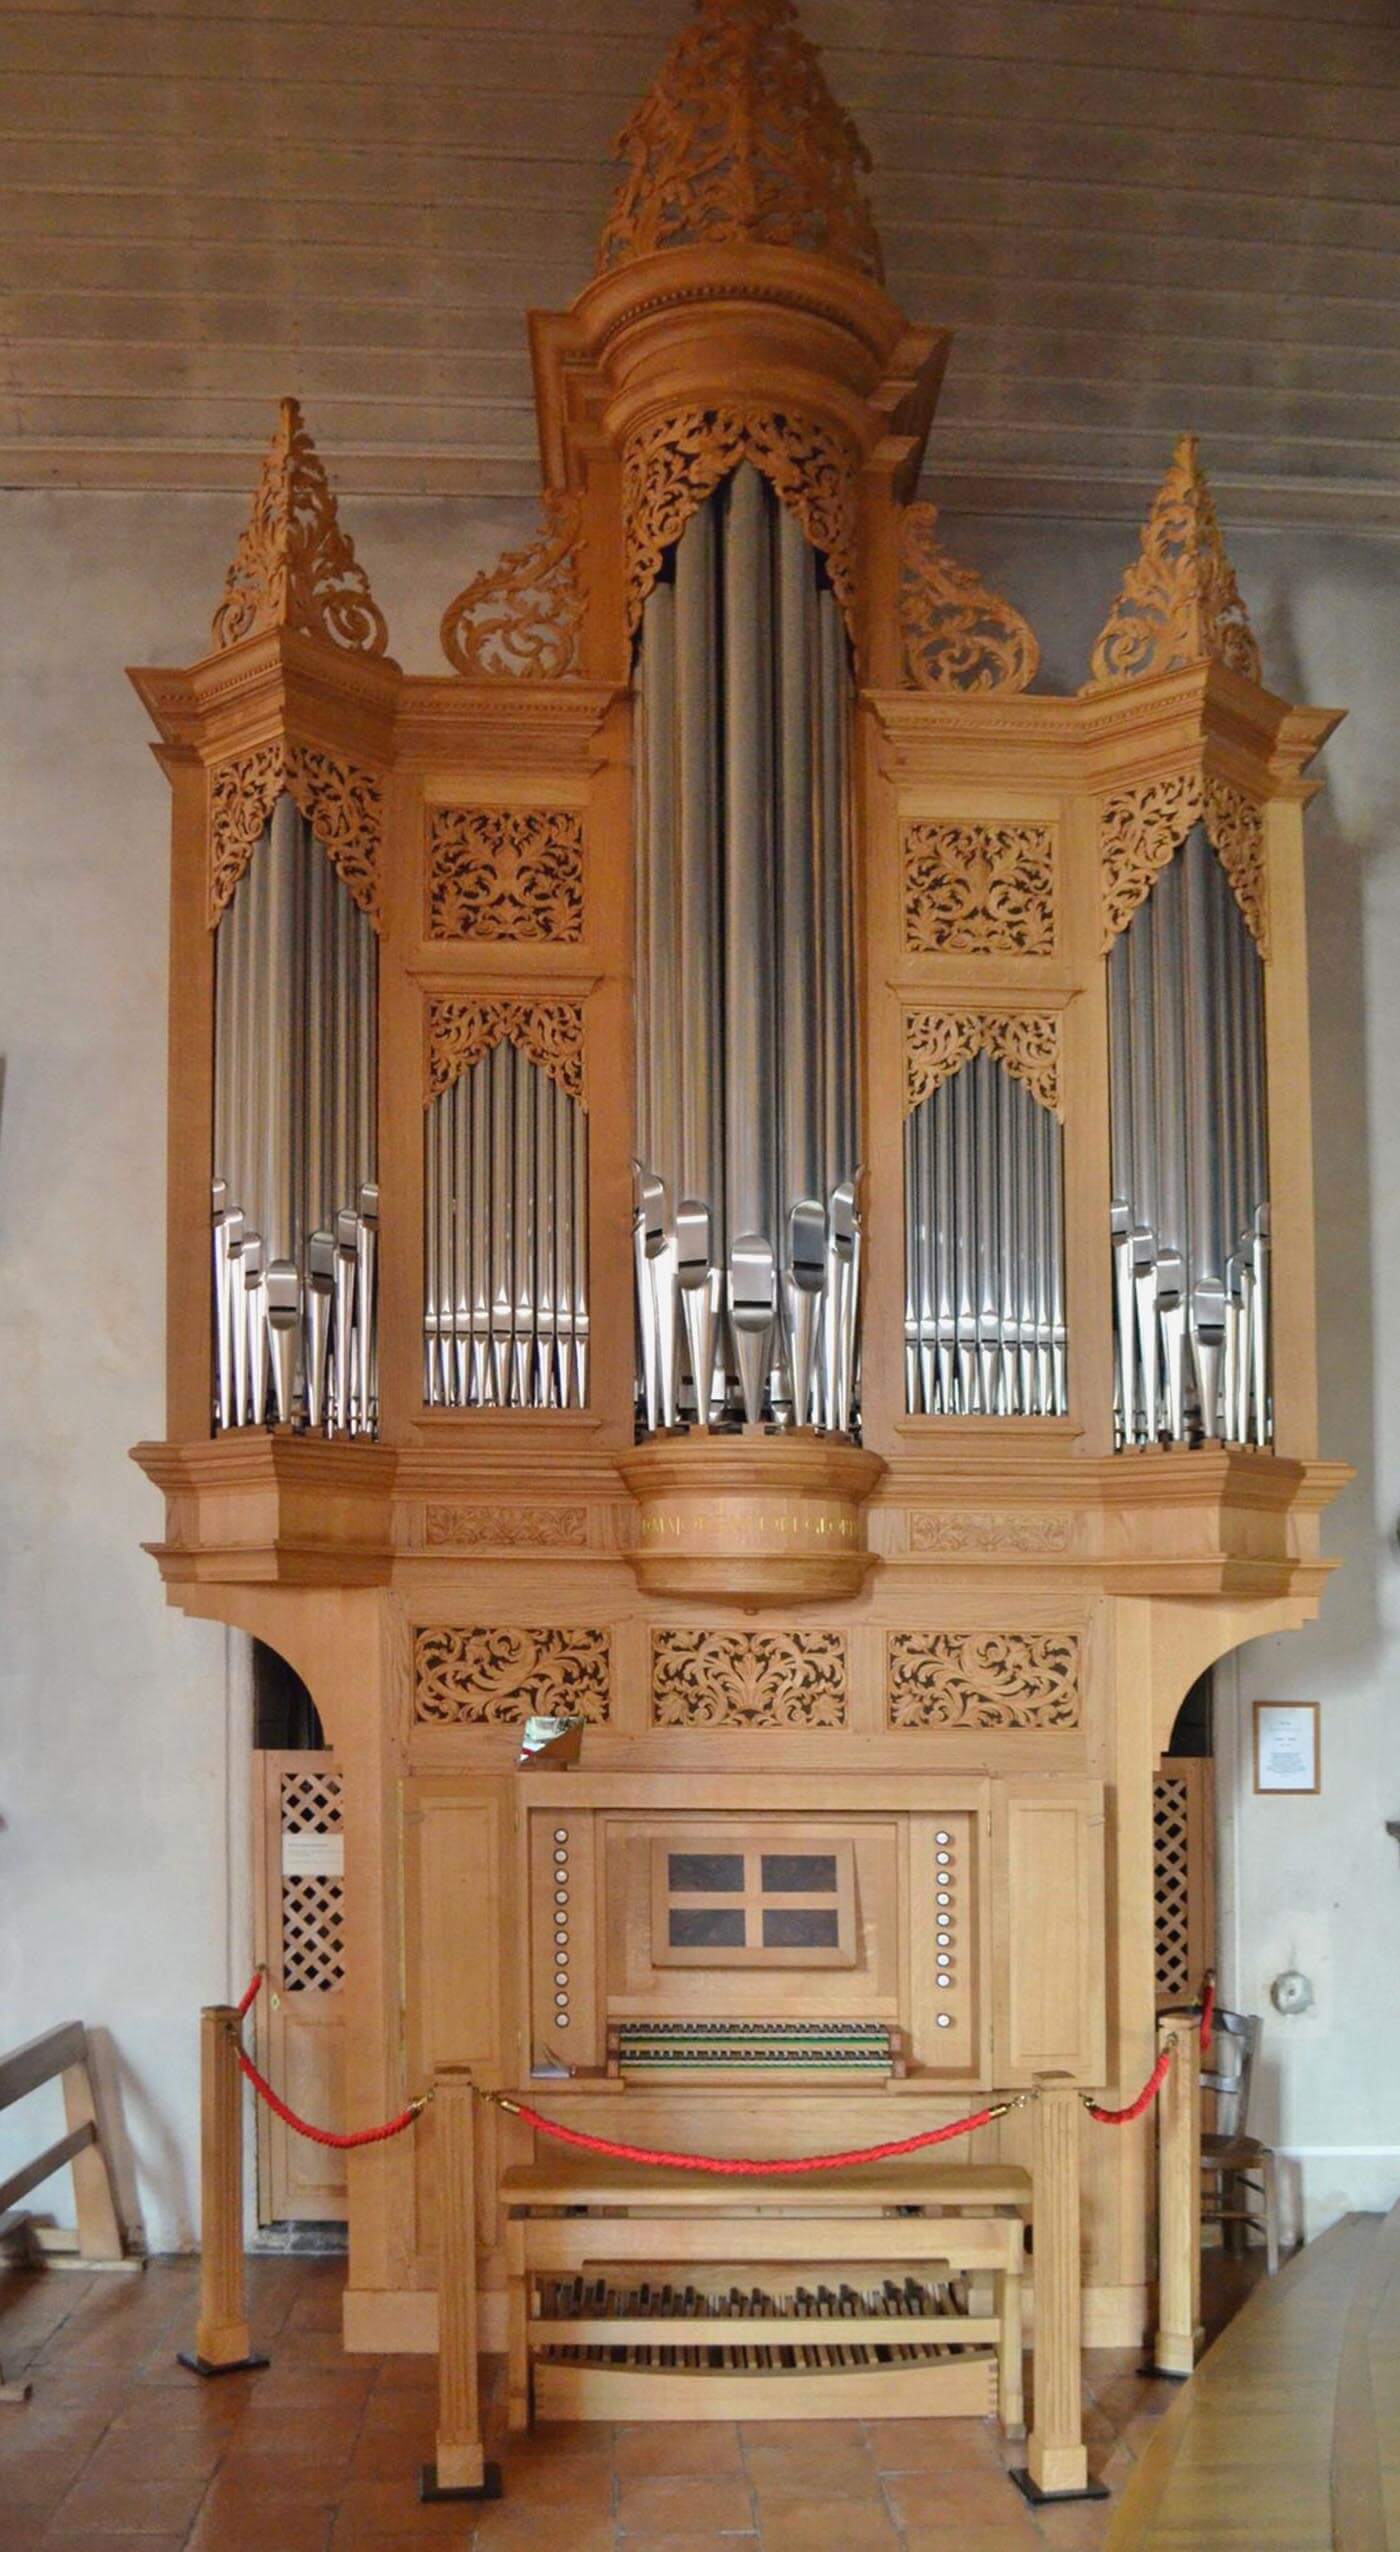 Construction of a new organ for the Catholic church of St Médard en Jalles